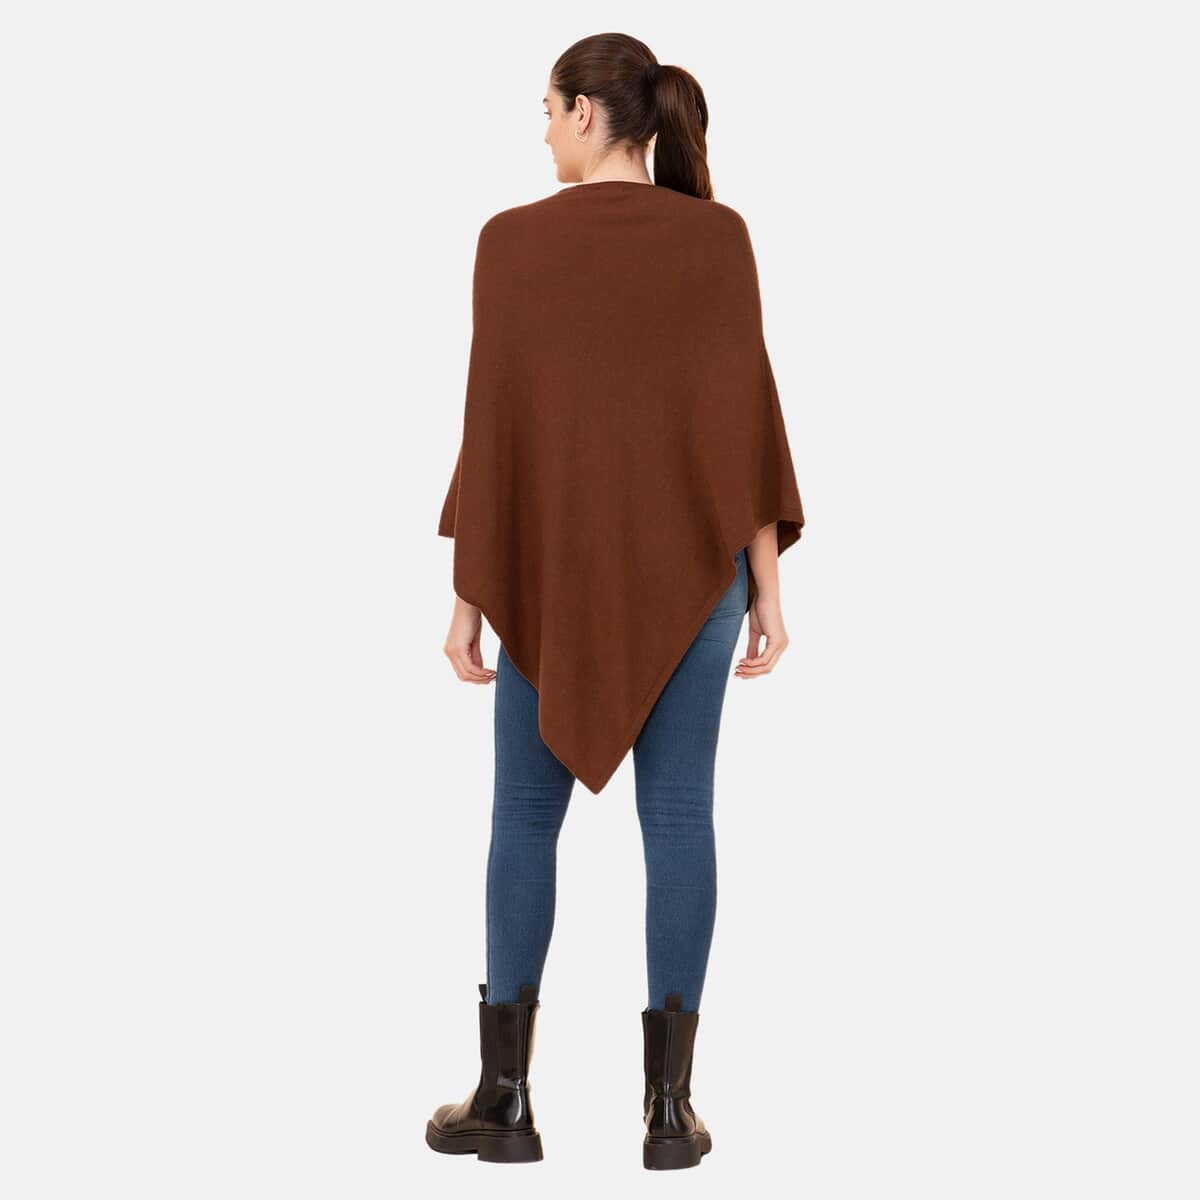 100% Cashmere Wool Designer LA MAREY Chocolate Brown Poncho - One Size Fits Most image number 1